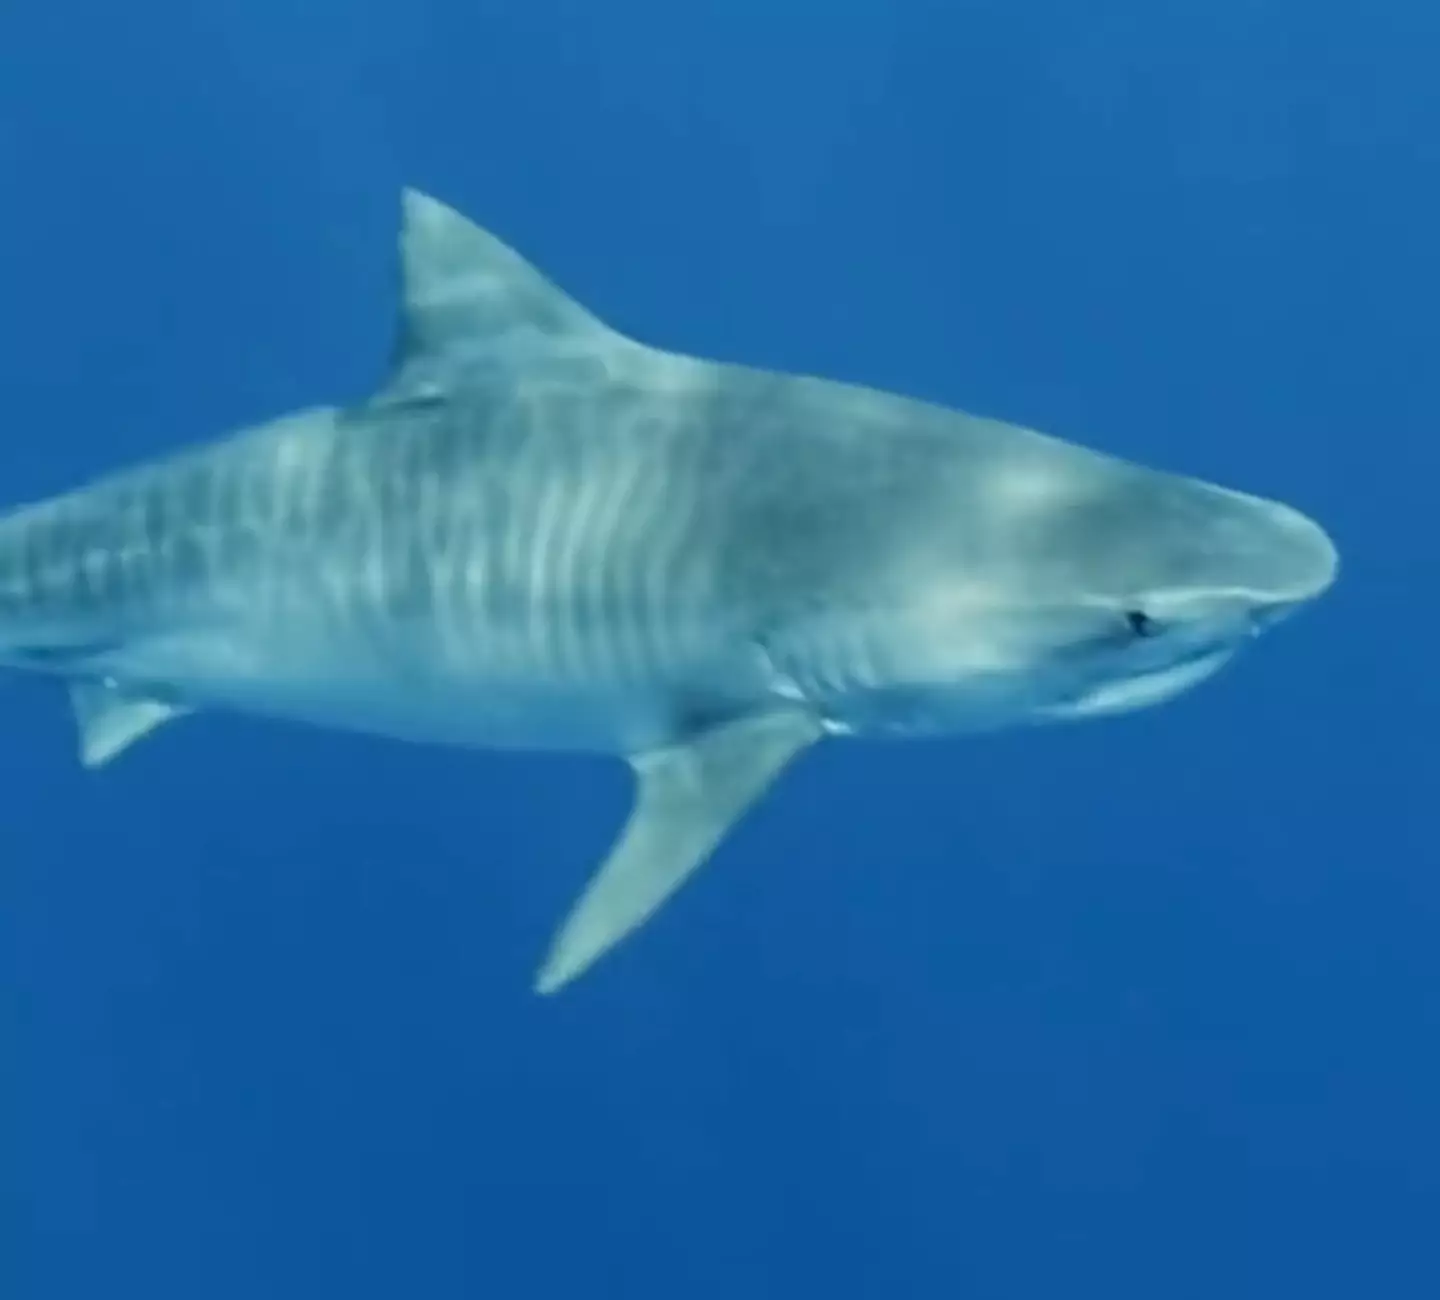 Tiger sharks are one of the few shark species which can actively be a danger to humans.